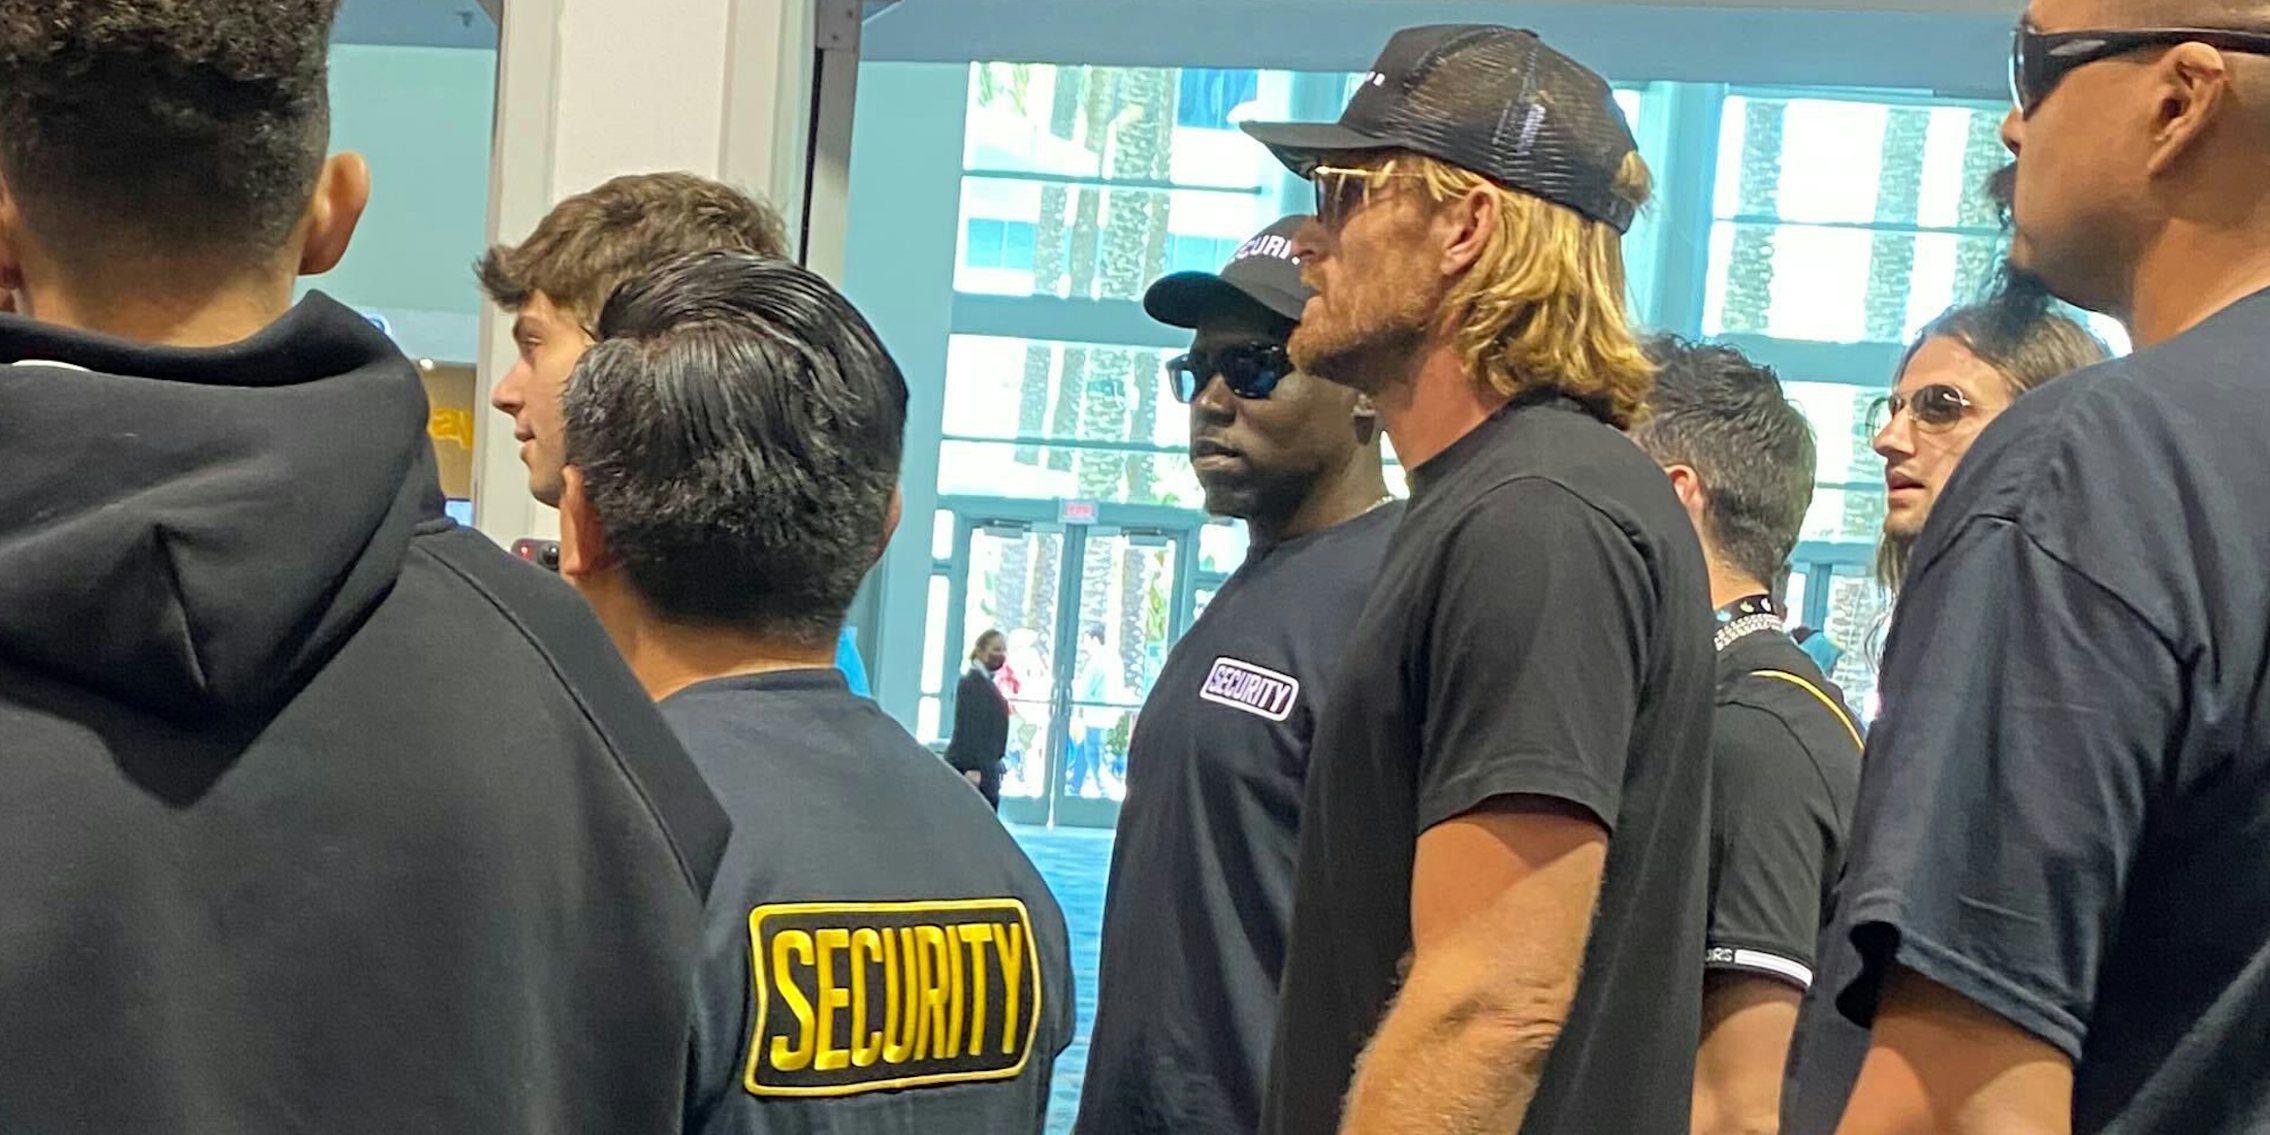 Logan Paul at VidCon surrounded by security